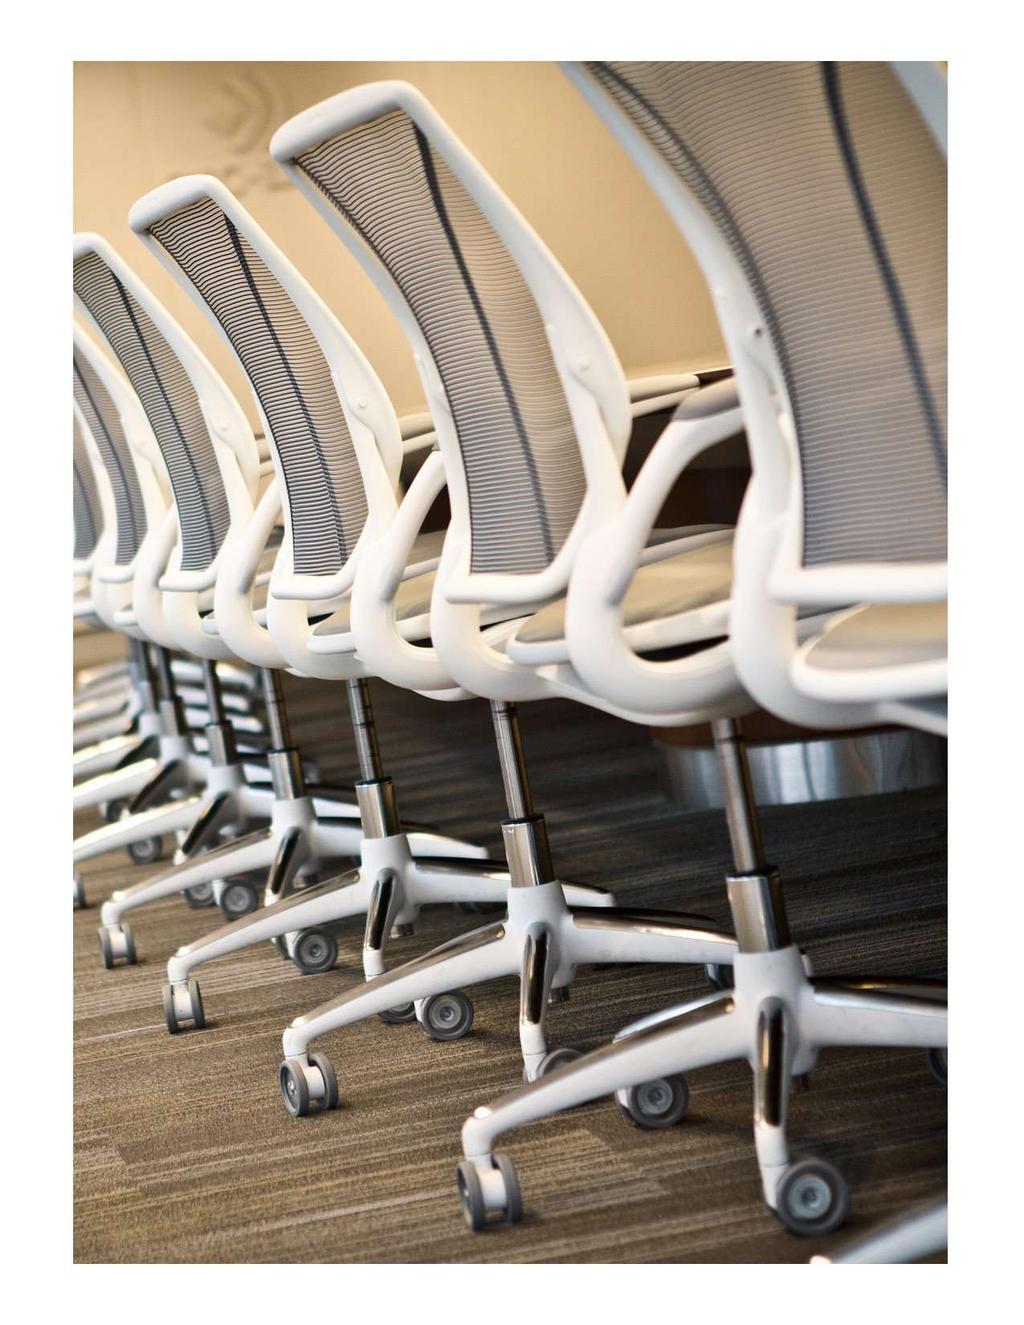 DIFFRIENT WORLD Diffrient World marks Humanscale s first foray into all-mesh task seating.